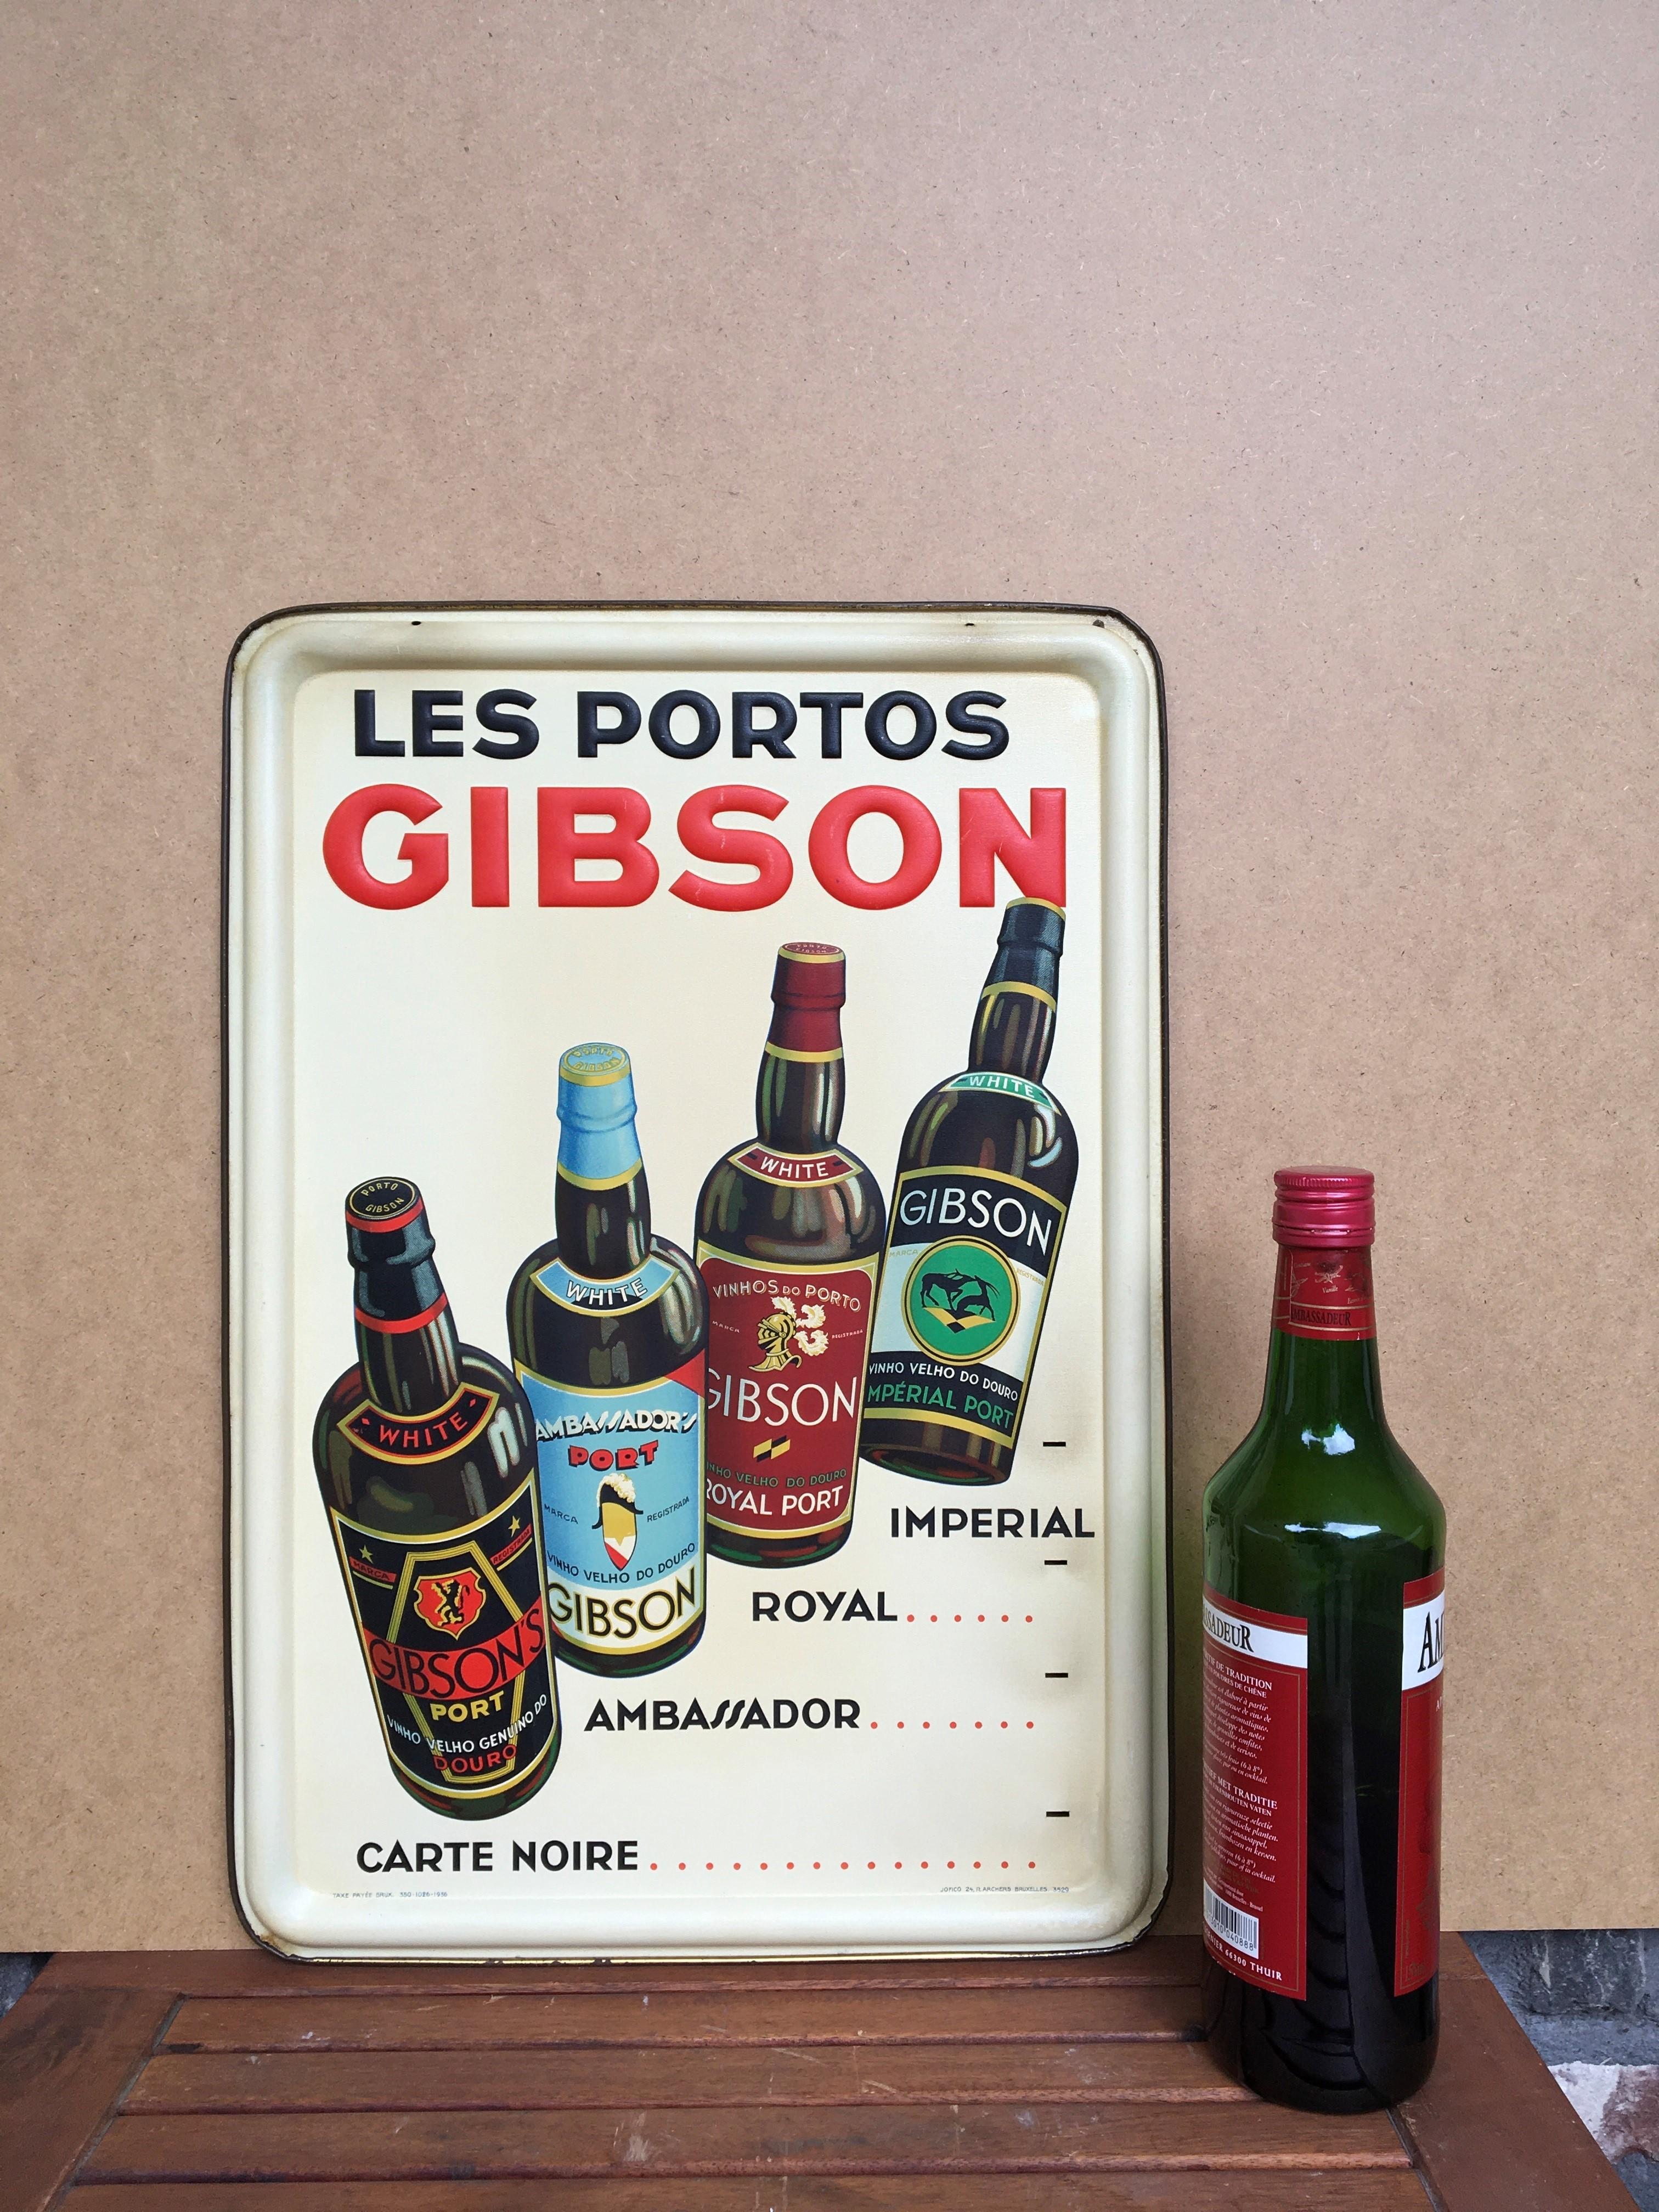 Art Deco Port Sign - Bar wall decoration. 
An advertising sign for the Port: Les Portos Gibson. 
This old sign for the Appetizer Drink Gibson's Port is dated 1936 and was made by the Company Jofico Brussels Belgium. 

This sign from 1936 is a